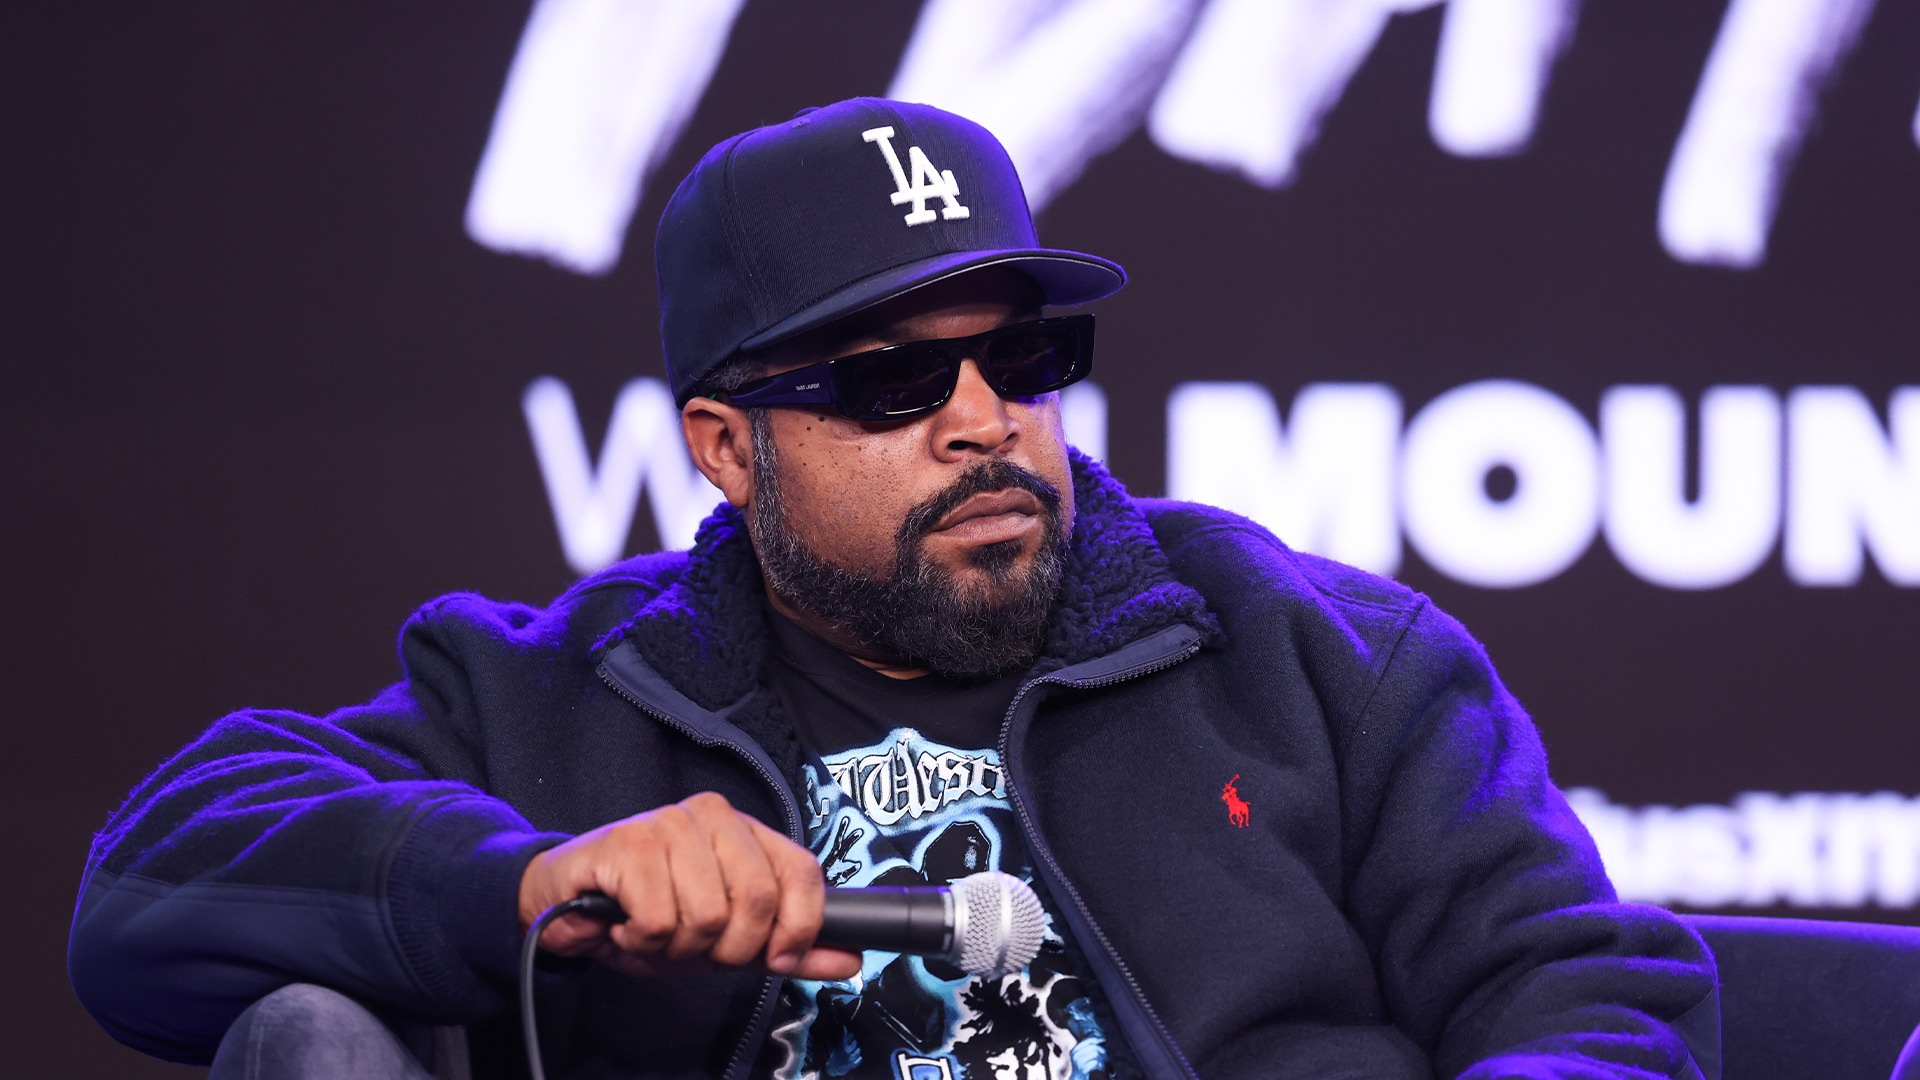 The U.S. Department Of Justice Is Investigating The NBA For Antitrust Violations Against Ice Cube's Big3 League